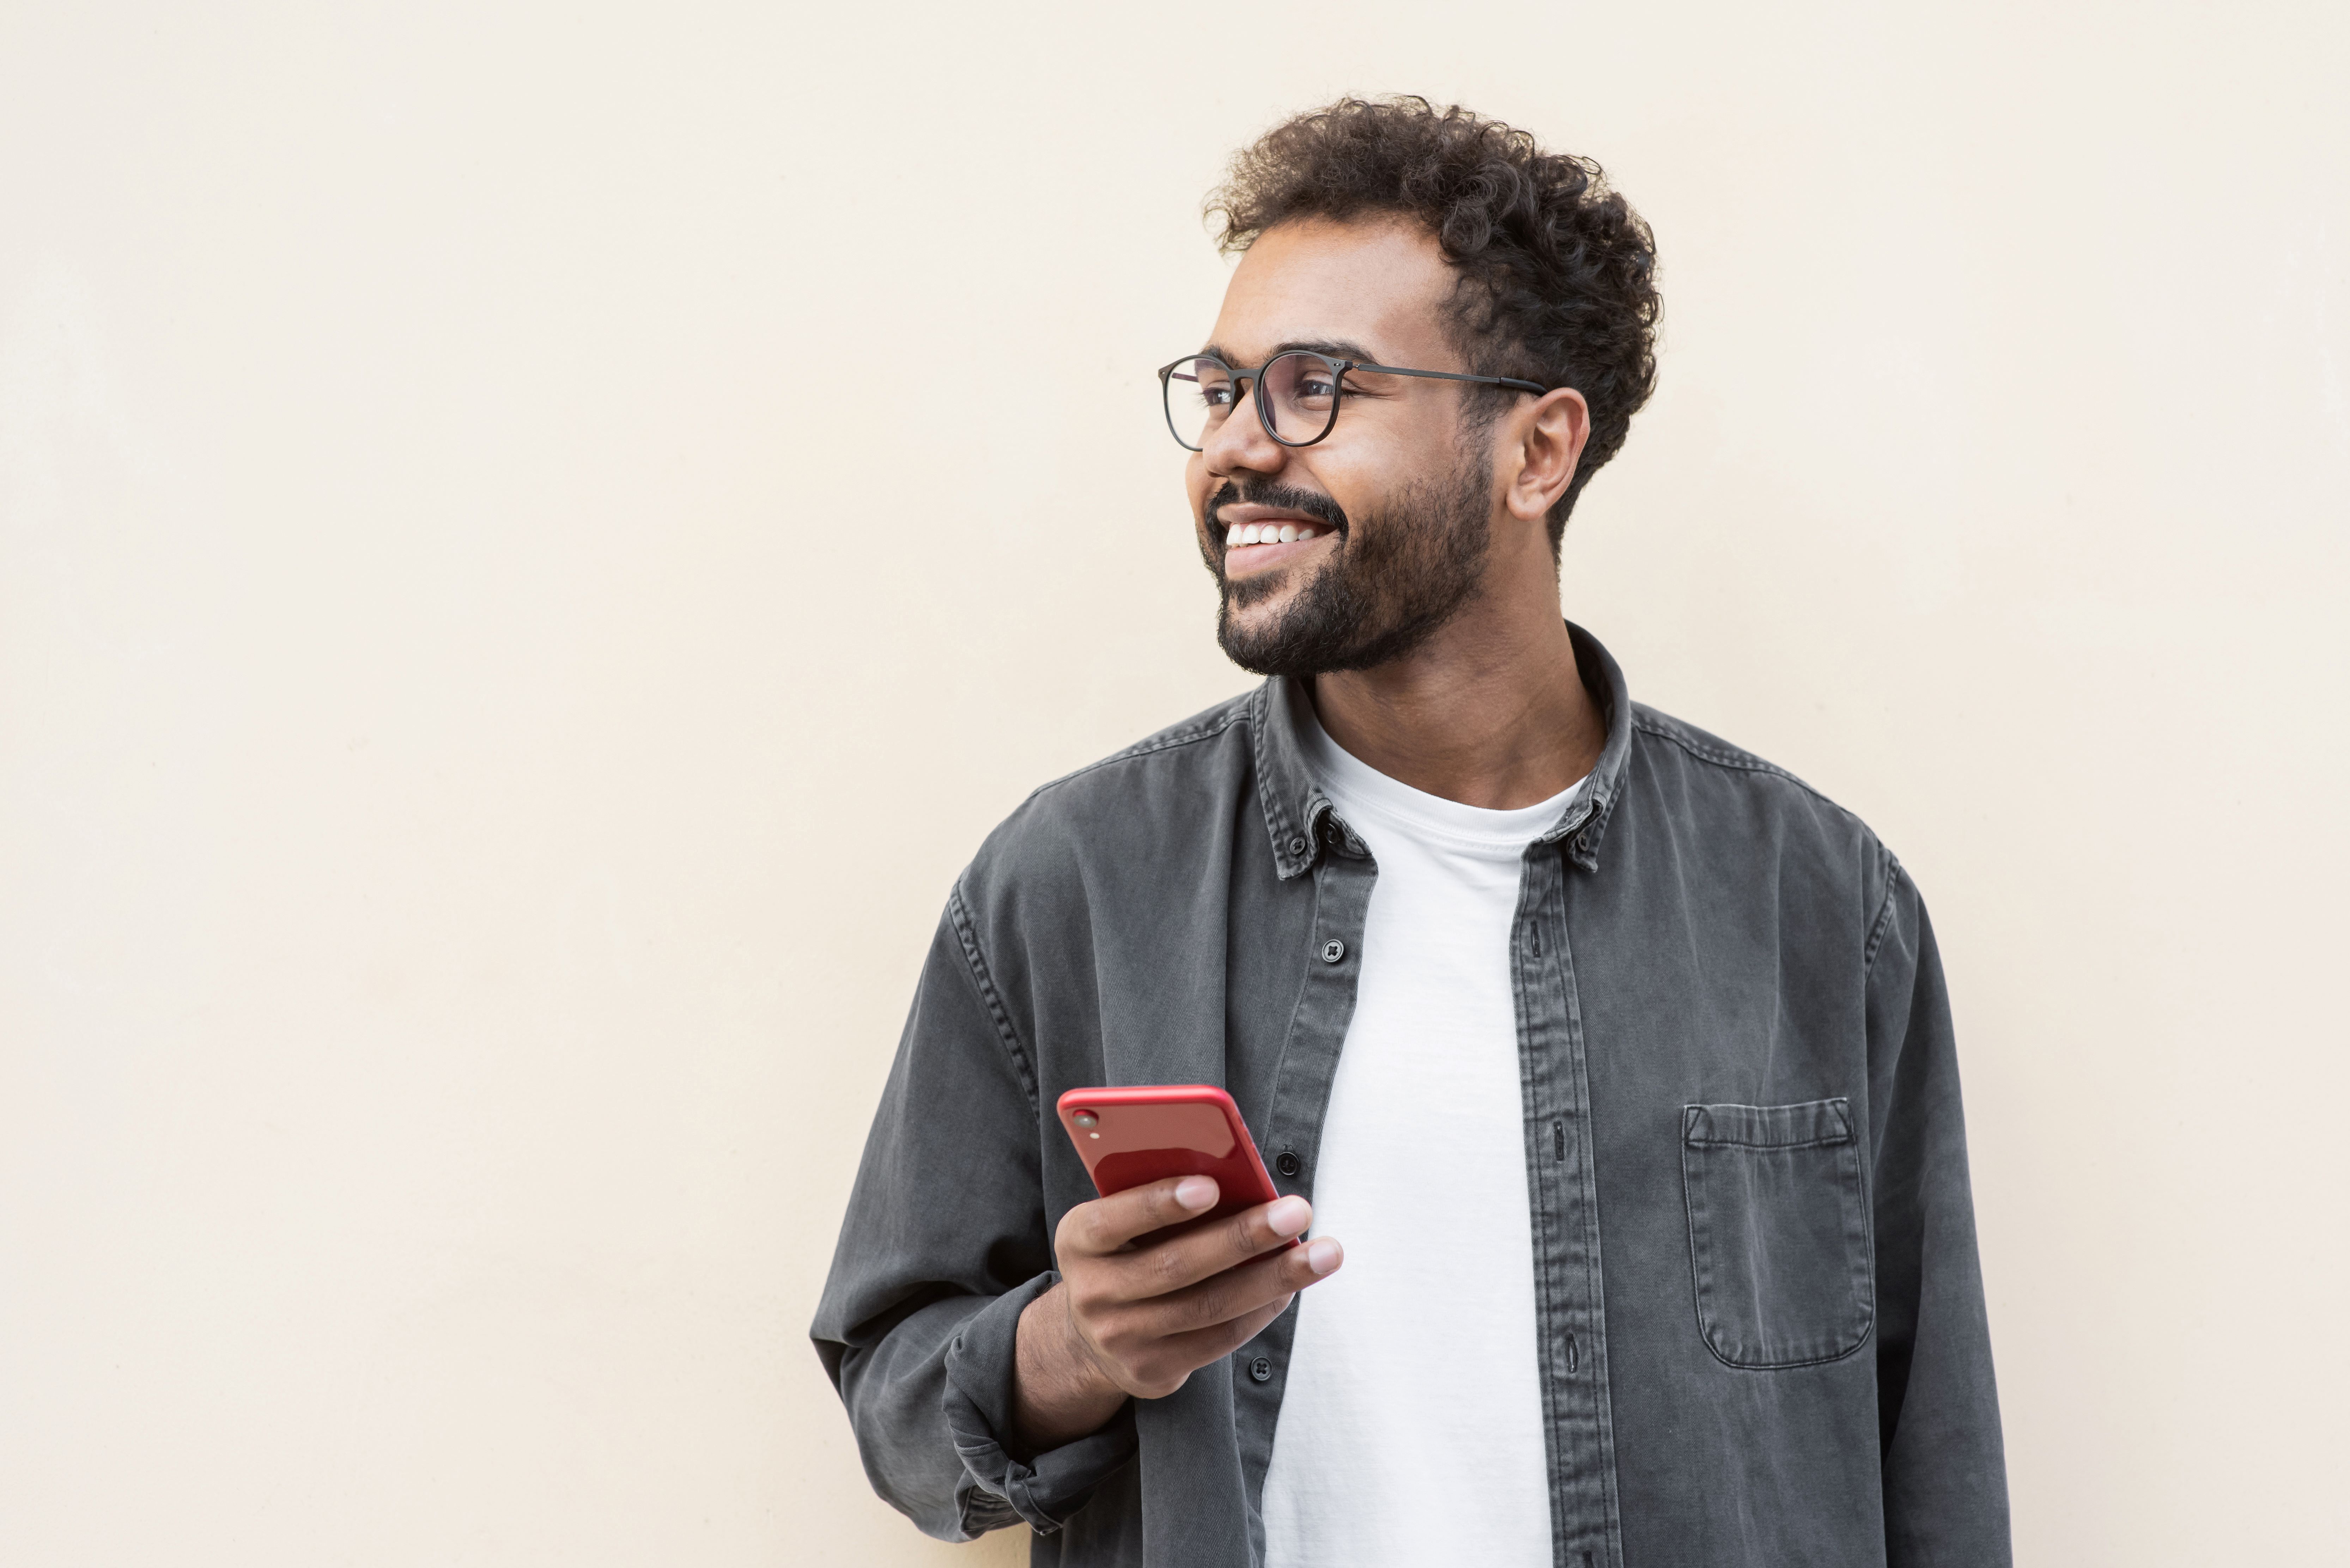 Man with brown curly hair and beard holds mobile phone and smiles looking off to his right